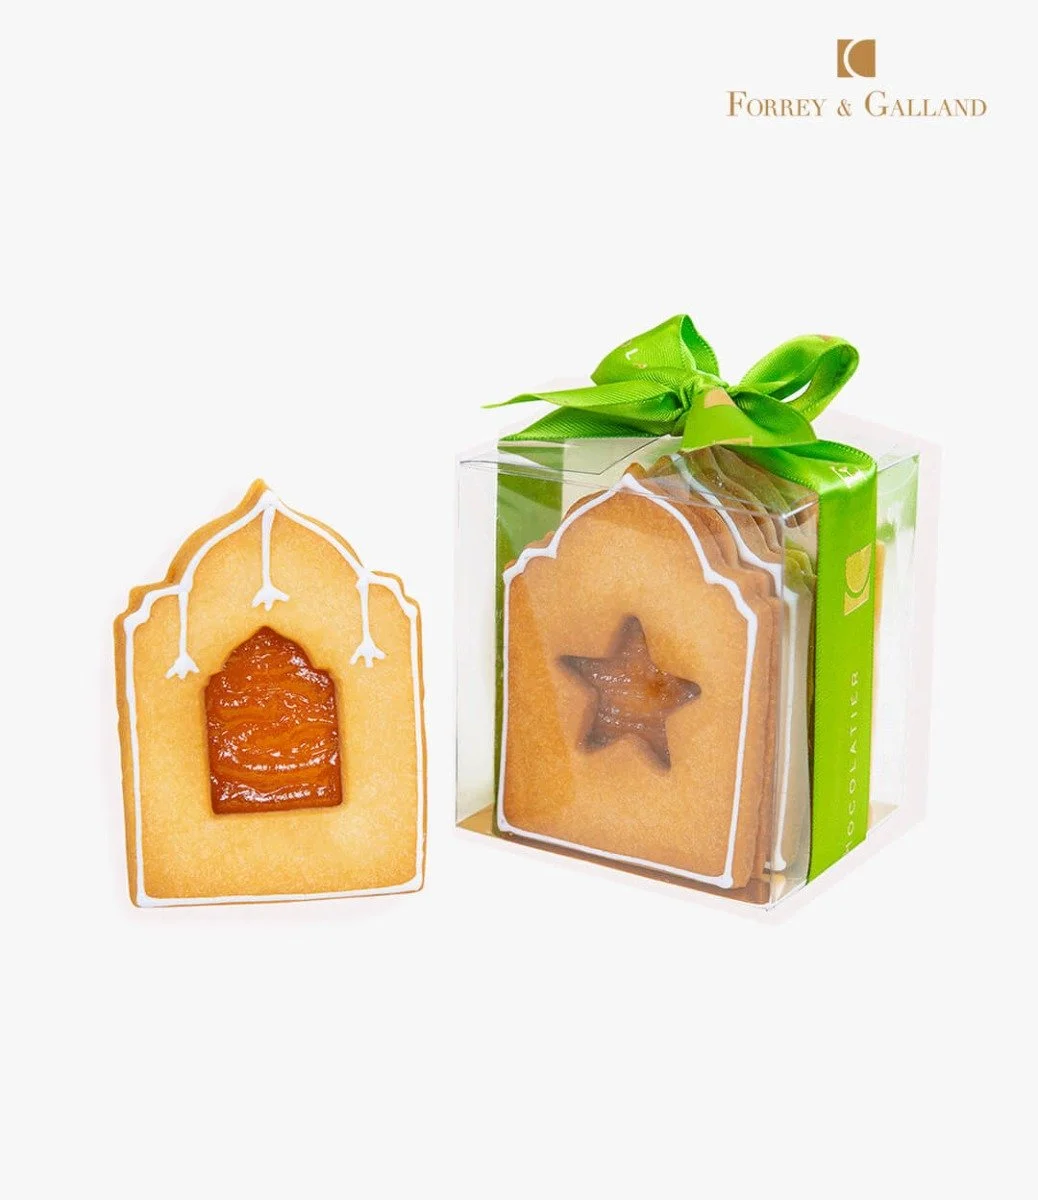 Mosque Shape Cookies 4 pcs by Forrey & Galland